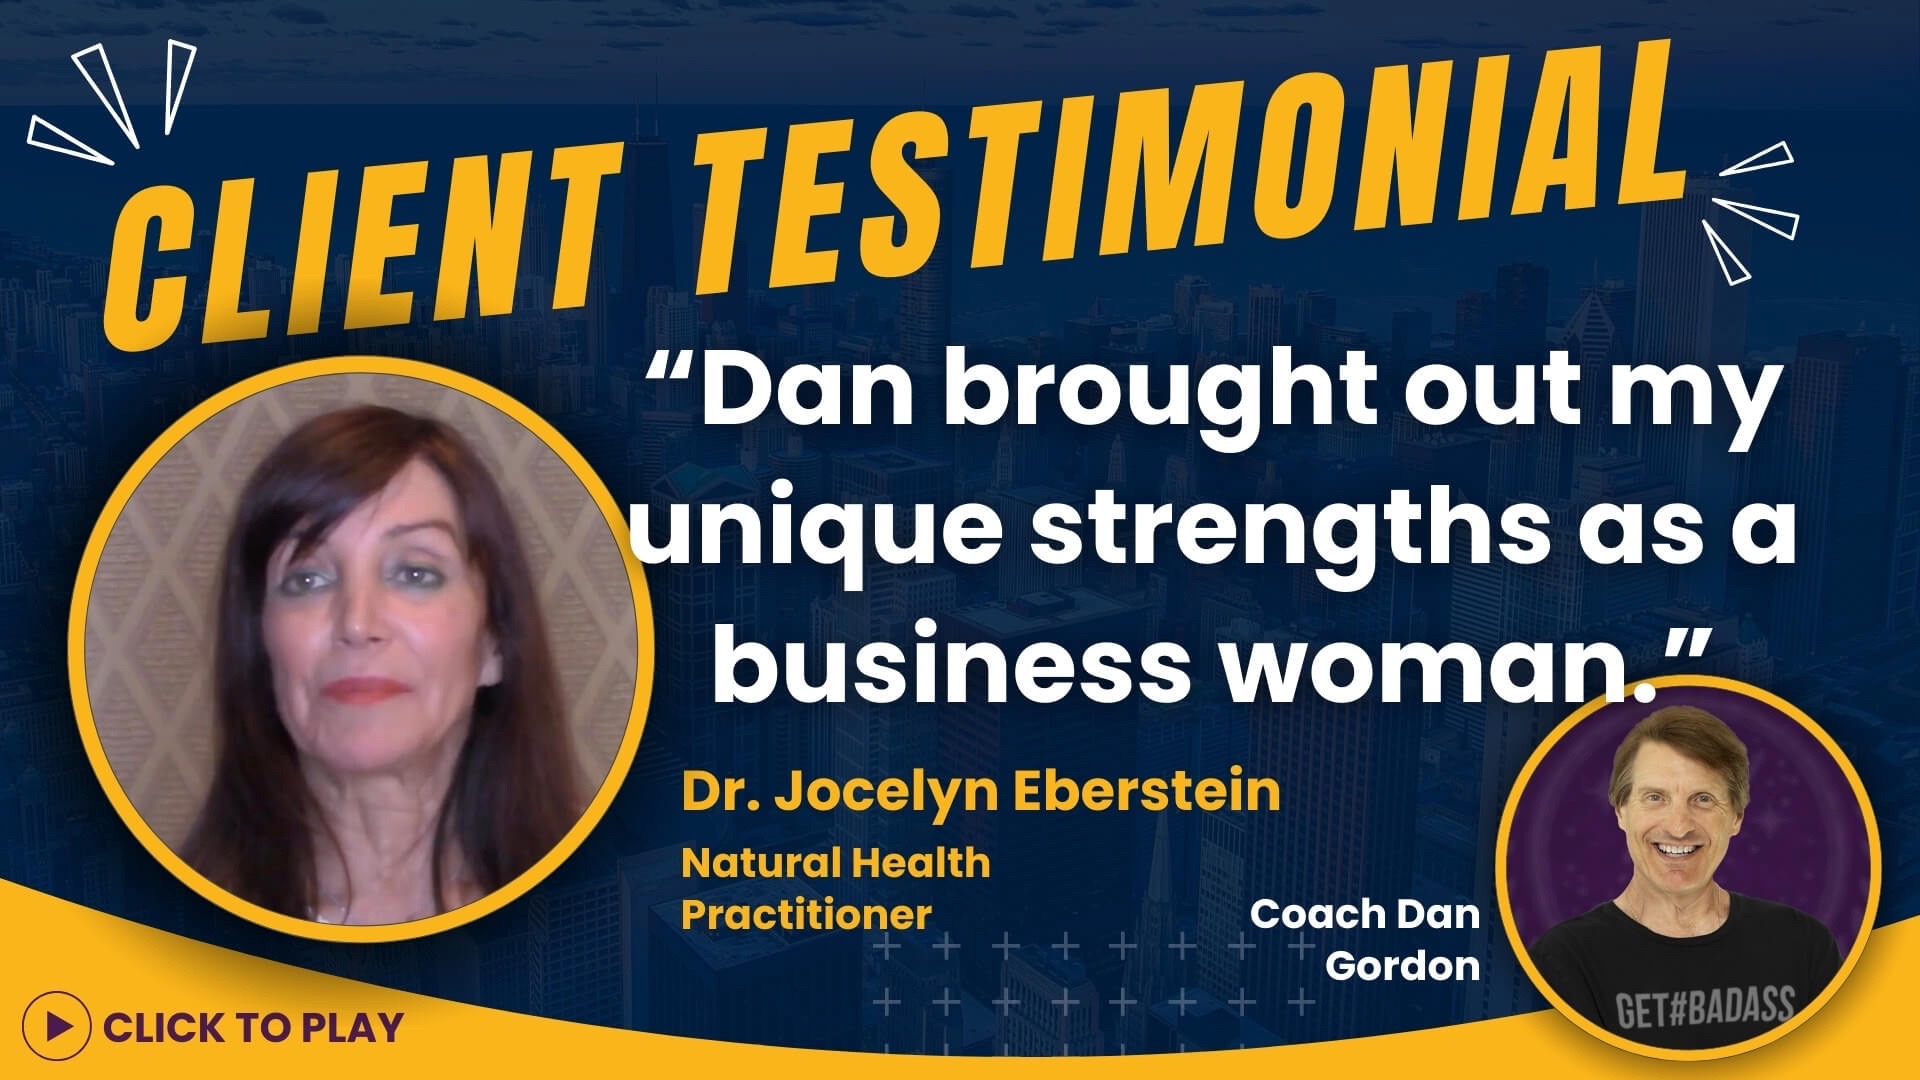 Dr. Jocelyn Eberstein, a Doctor of Oriental Medicine, provides a client testimonial stating 'Coach Dan Gordon brought out my unique strengths as a businesswoman' with a backdrop of the Los Angeles skyline.